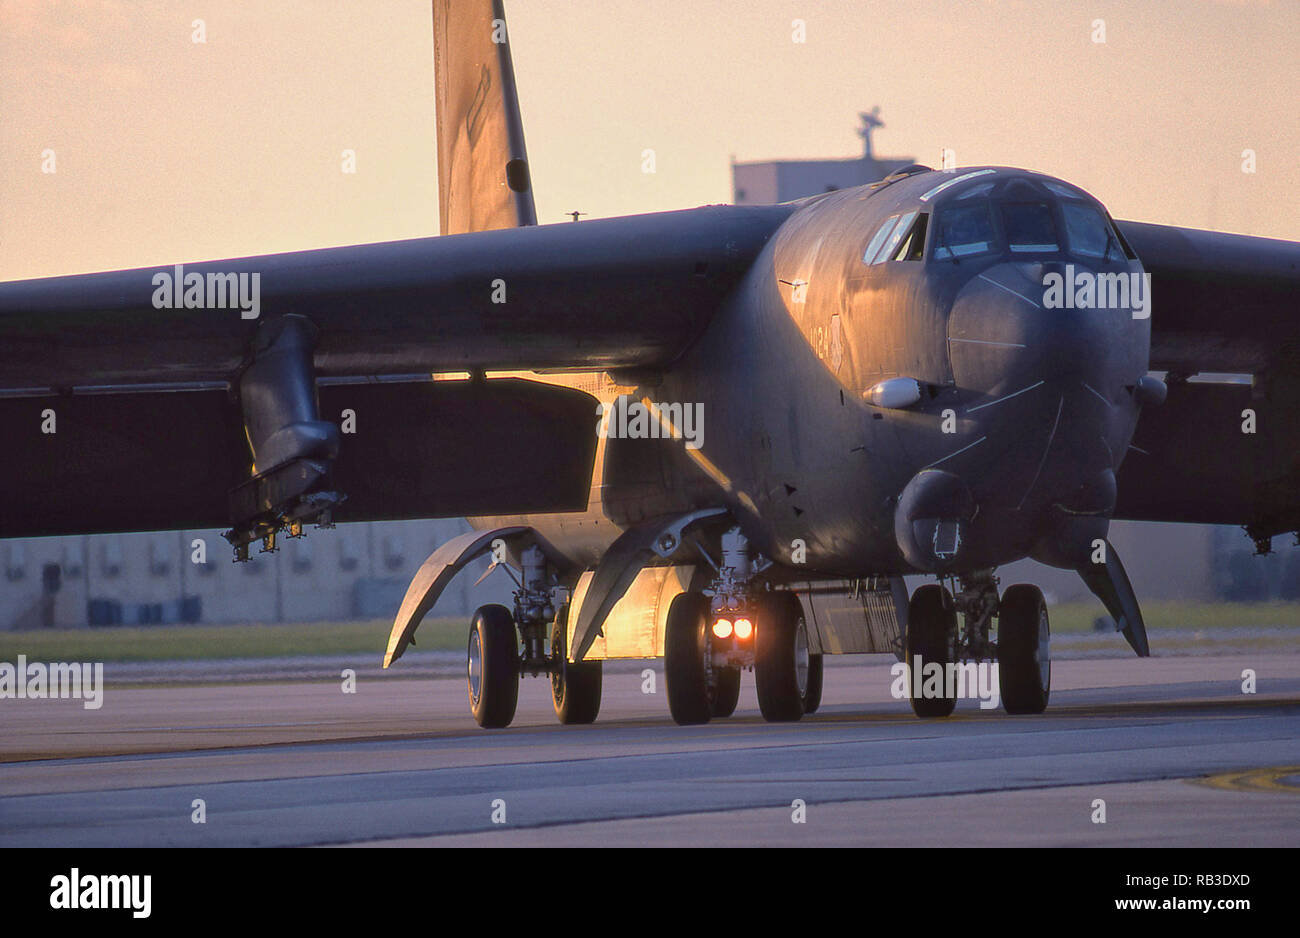 Boeing B-52 Stratofortress bombardier à long rayon d'action Banque D'Images